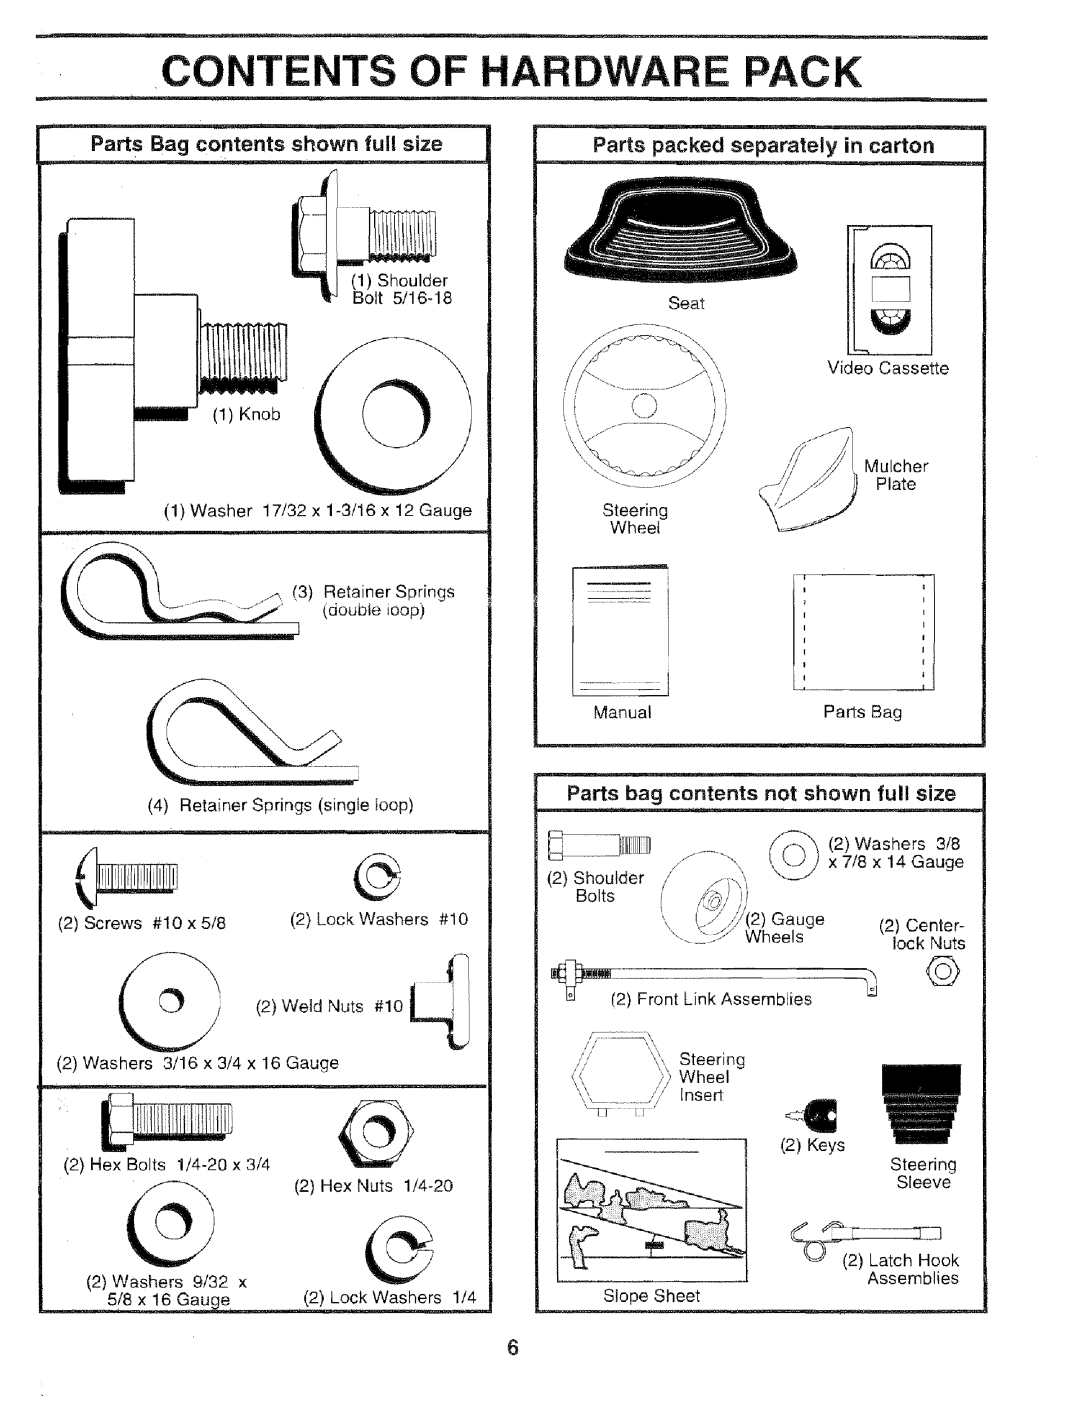 Sears 917.25051 manual Contents, Pack, Parts Bag contents shown, full size, Parts packed separately in carton 